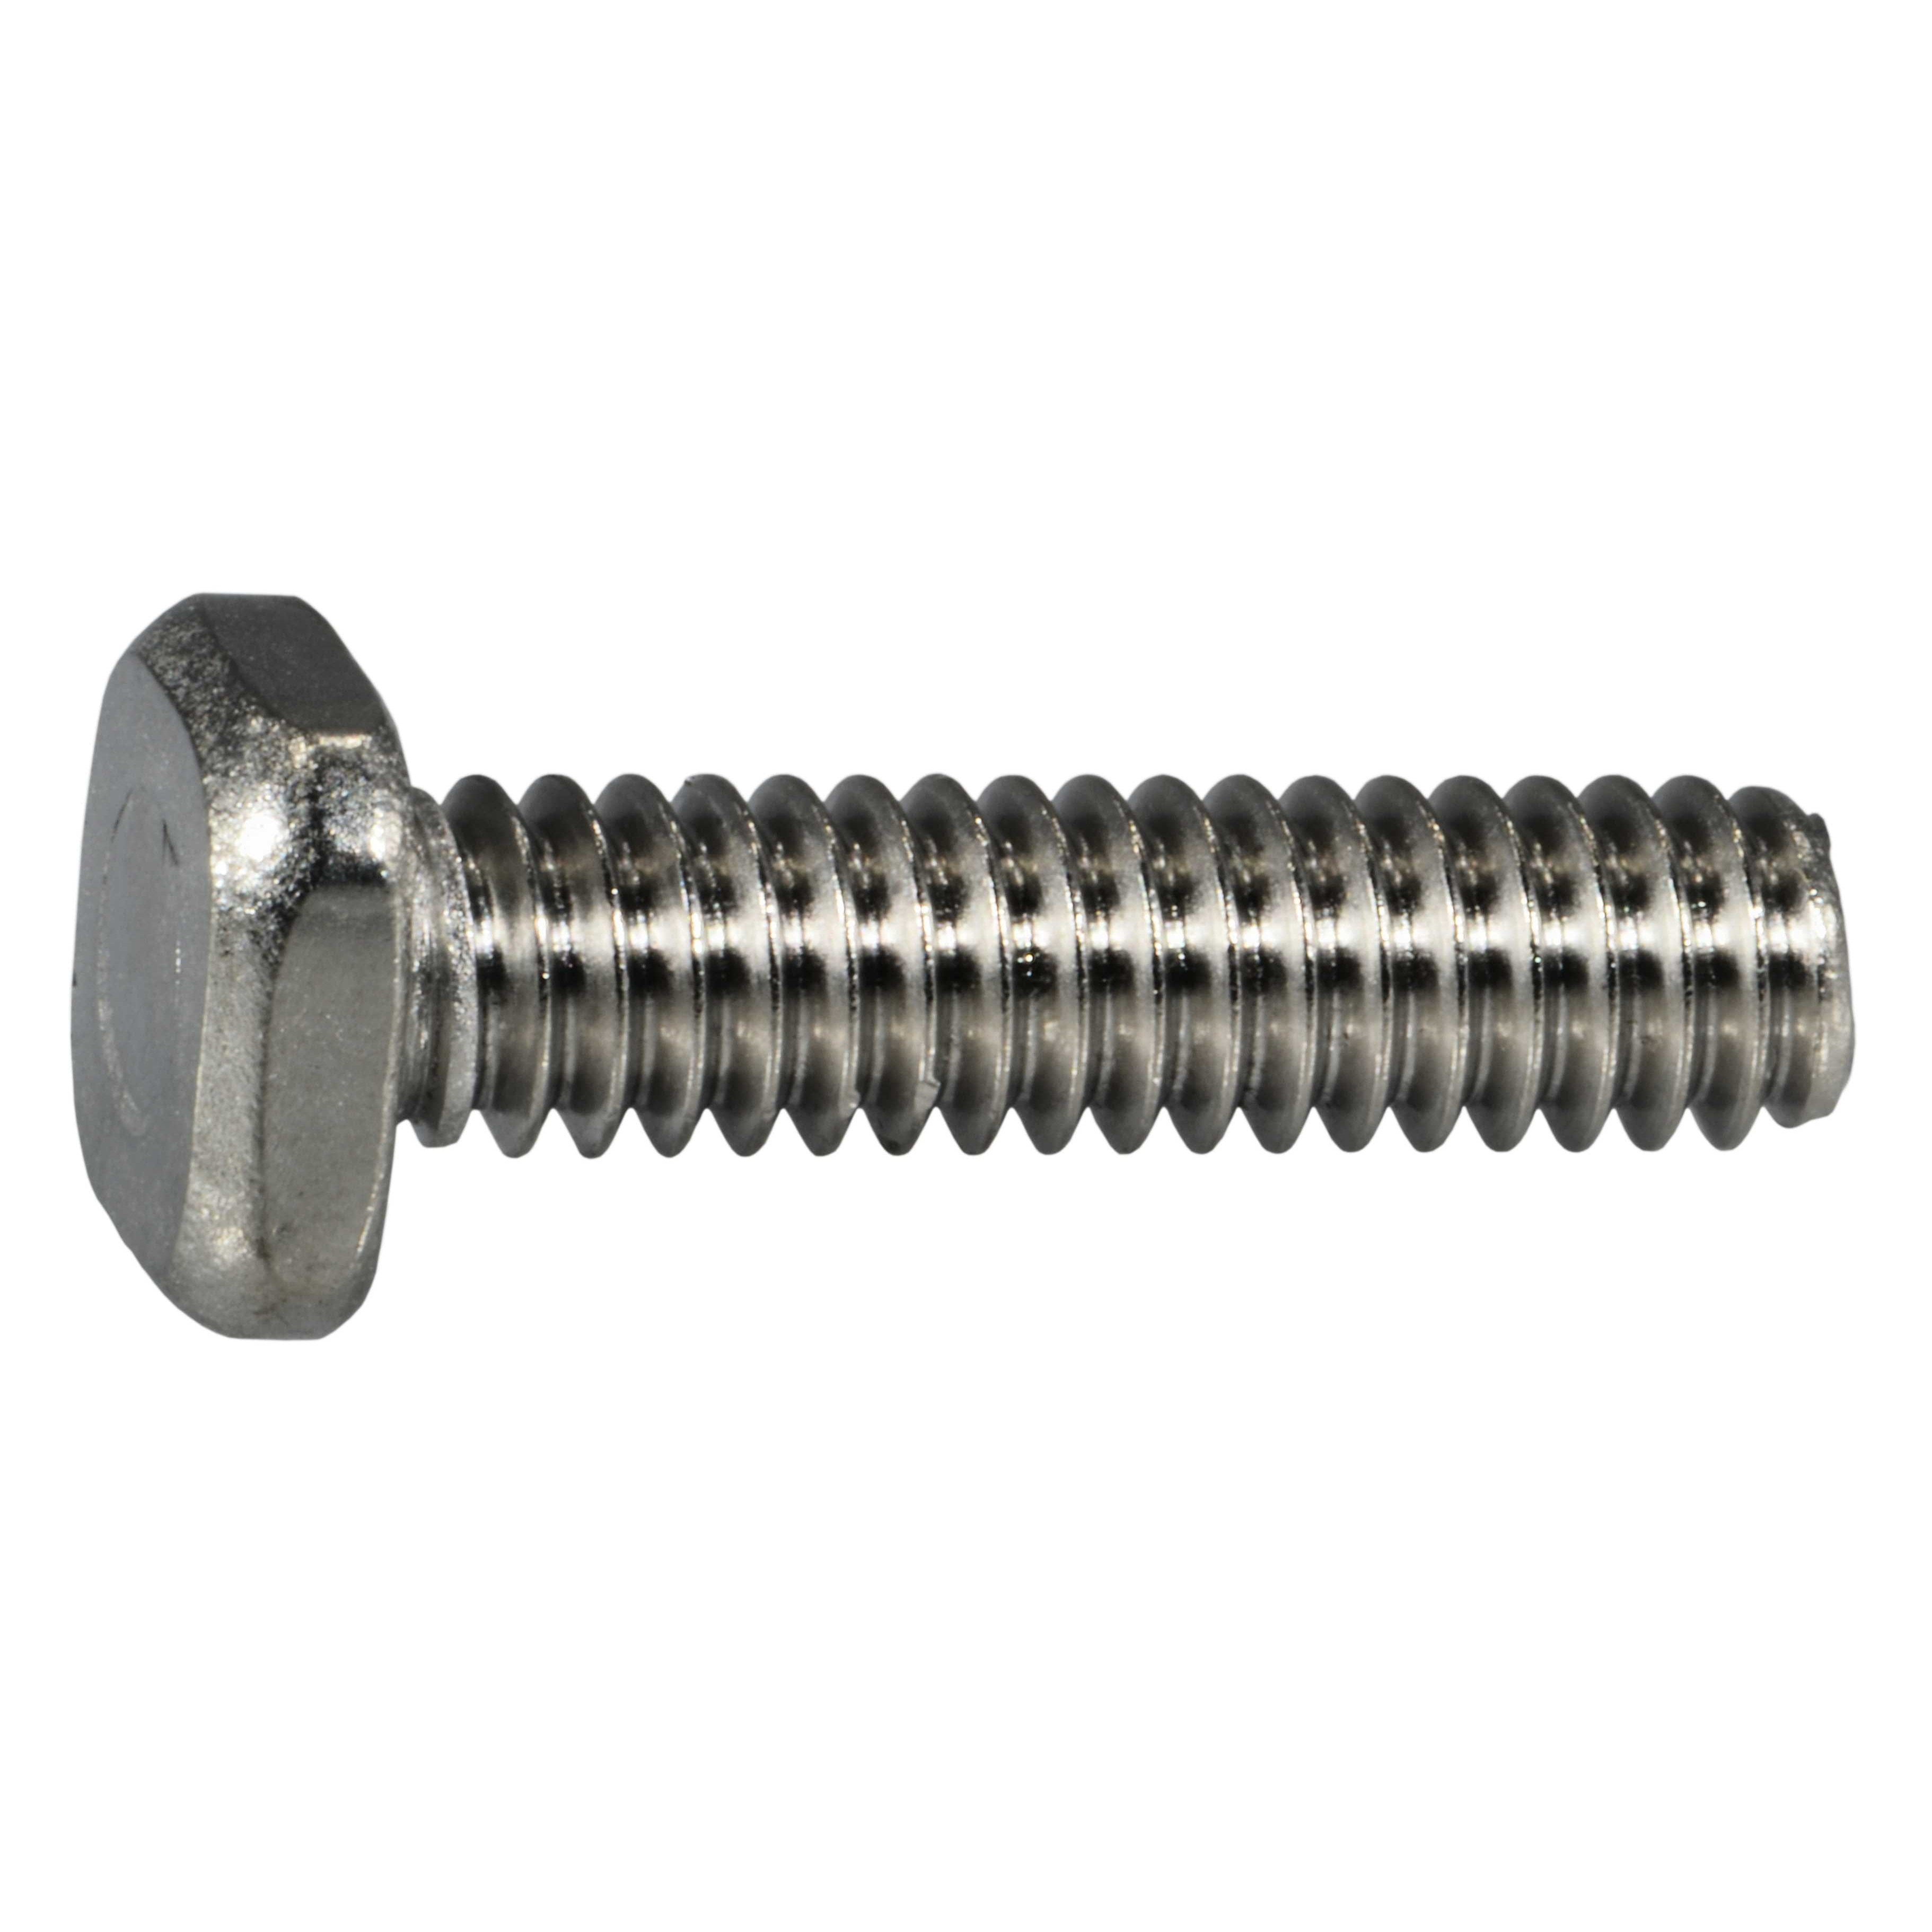 1/4-20 x 5/8" Long Thumb Screw *STAINLESS STEEL* FAST SHIP 4 Four 